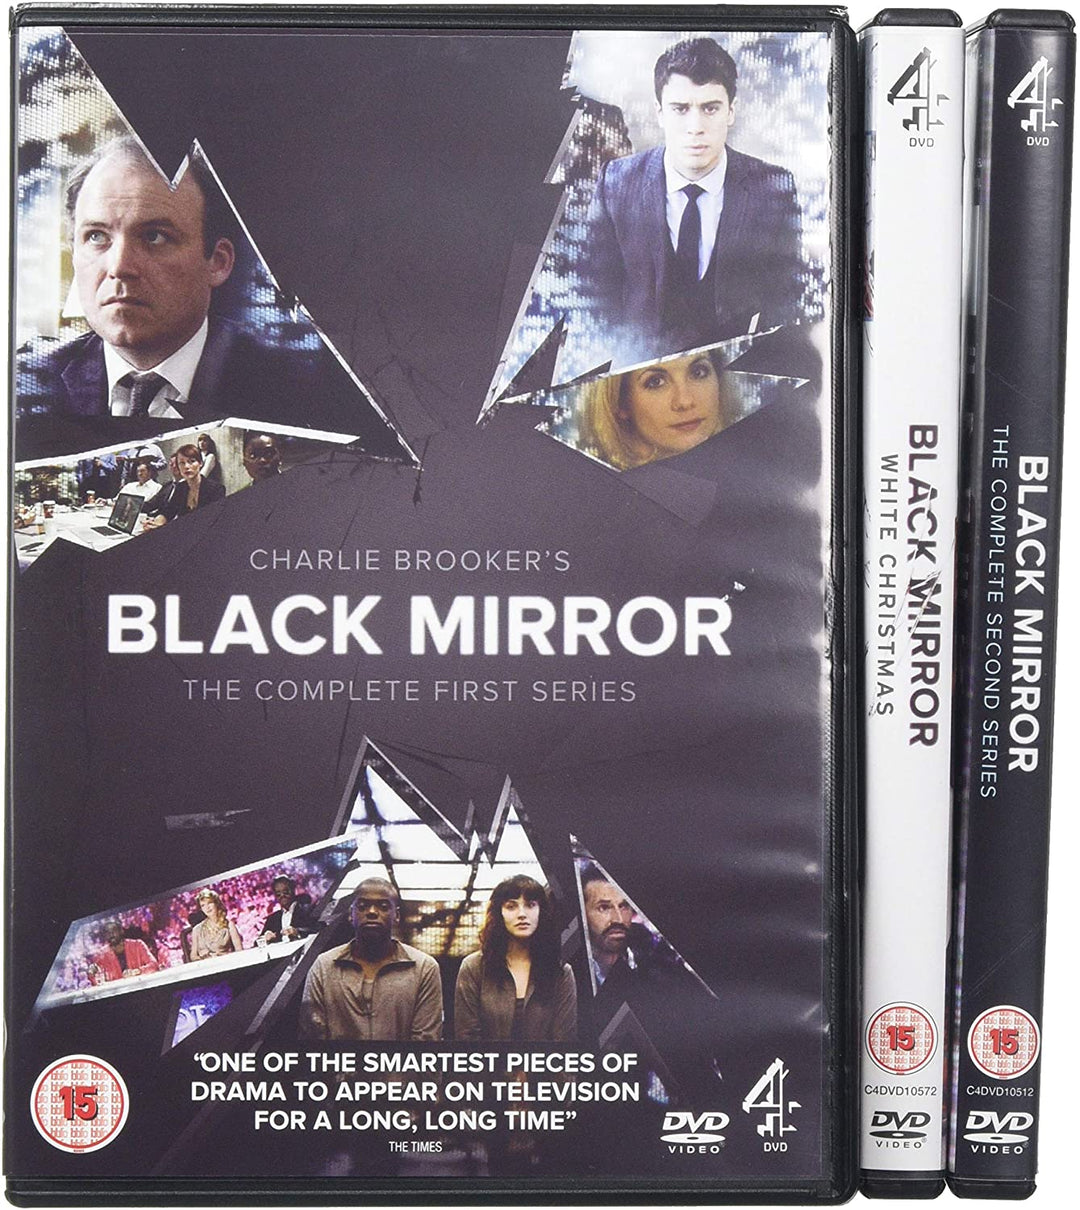 Black Mirror - Series 1-2 and Special - Sci-fi [DVD]